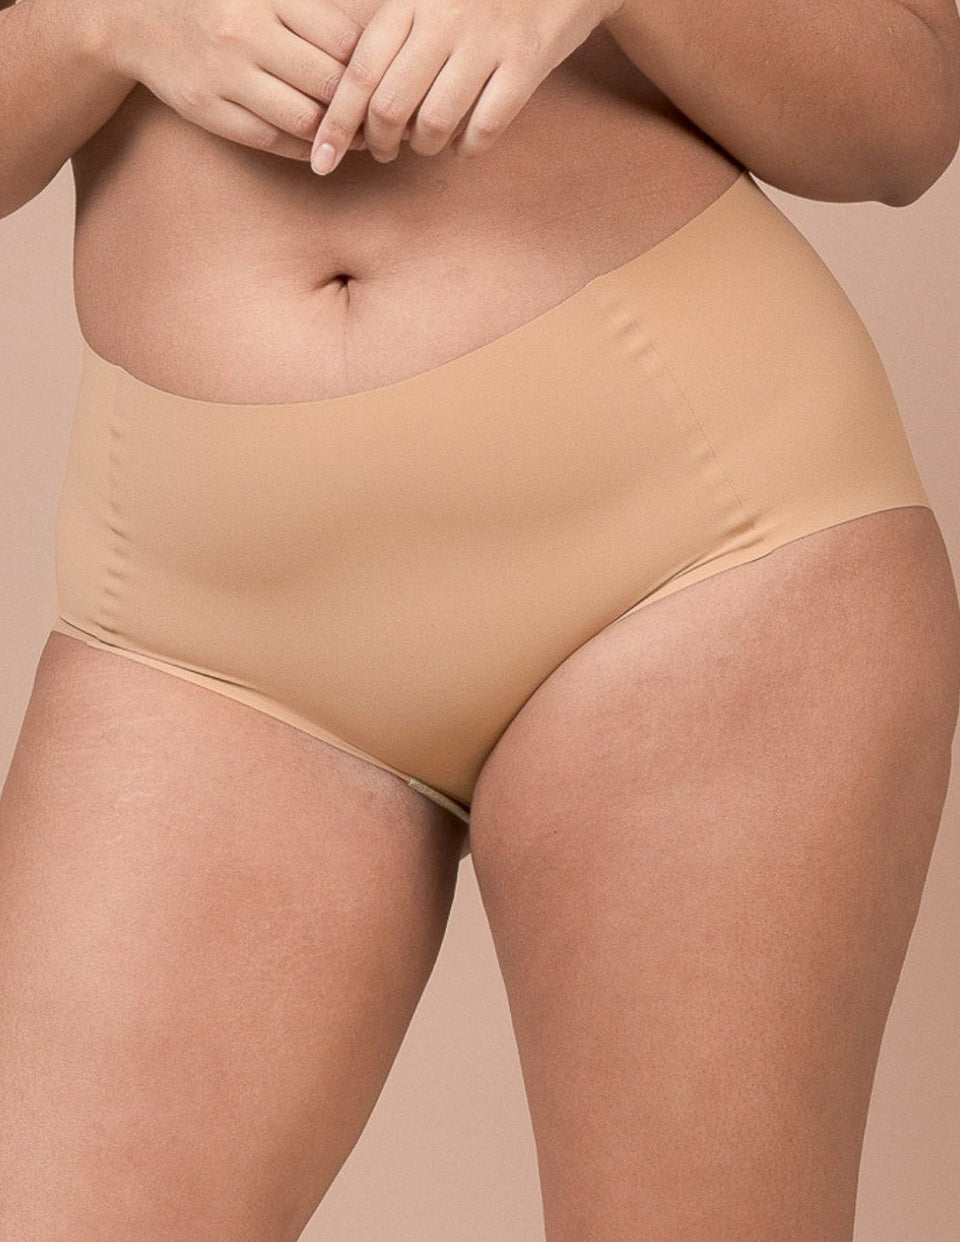 Seamless Lingerie Second Skin Seamless Boyshorts - Americano S/M - 7  requests